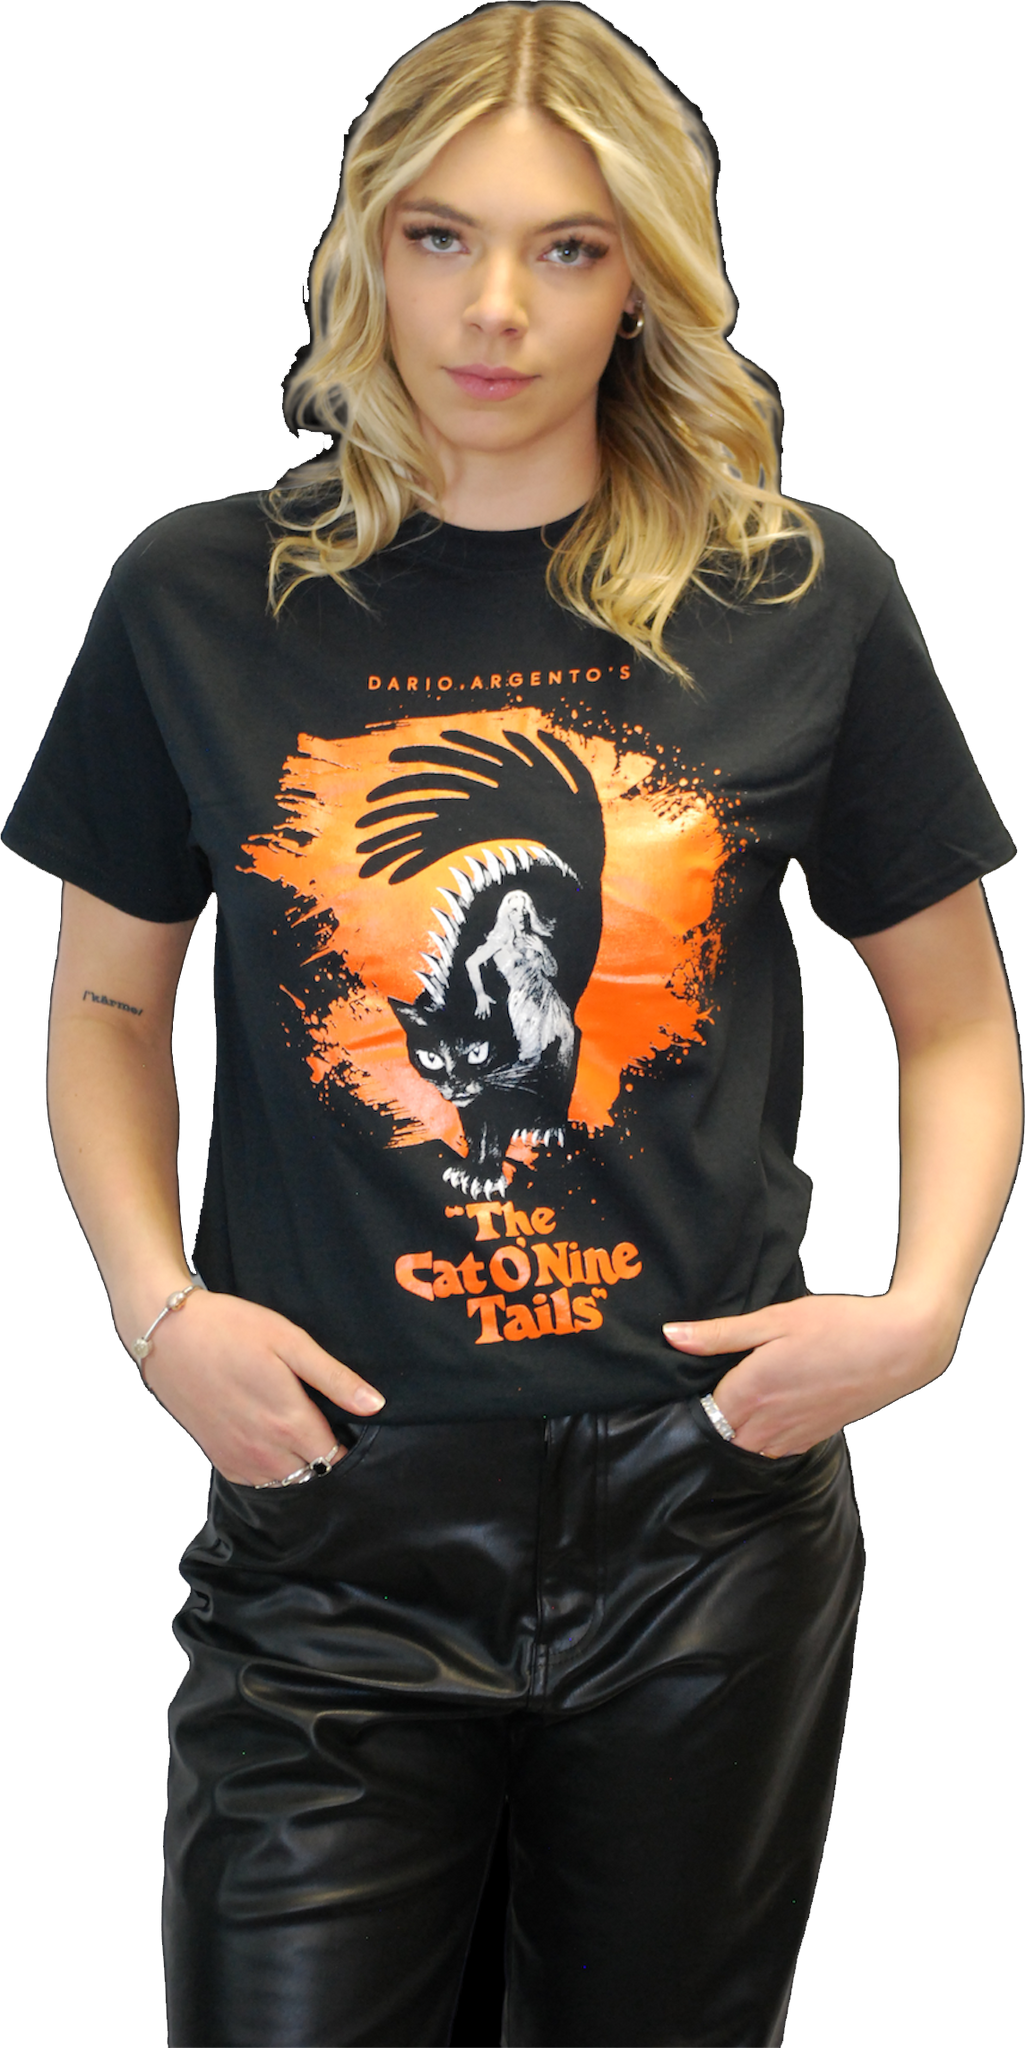 DARIO ARGENTO “CAT O' NINE TAILS” LIMITED EDITION ARROW VIDEO 4K COVER T-SHIRT